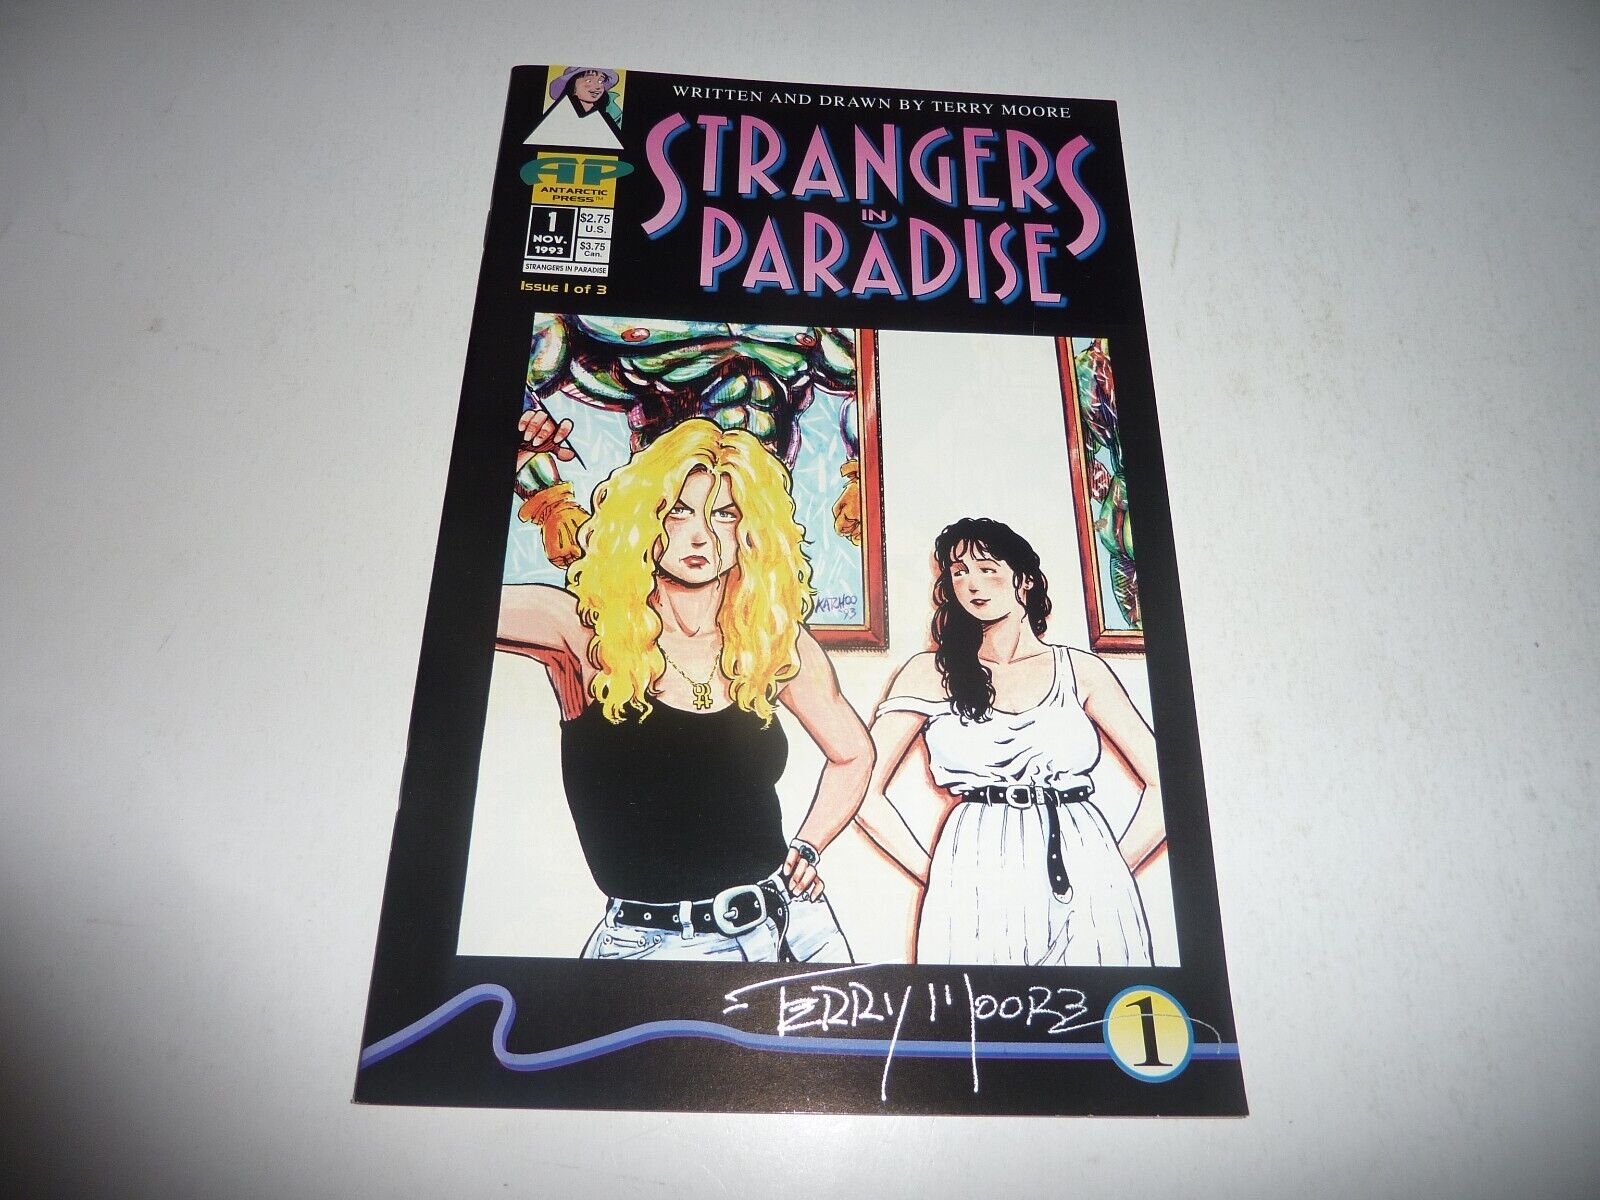 STRANGERS IN PARADISE #1 Antarctic Press 1993 3rd Print SIGNED TERRY MOORE VF+